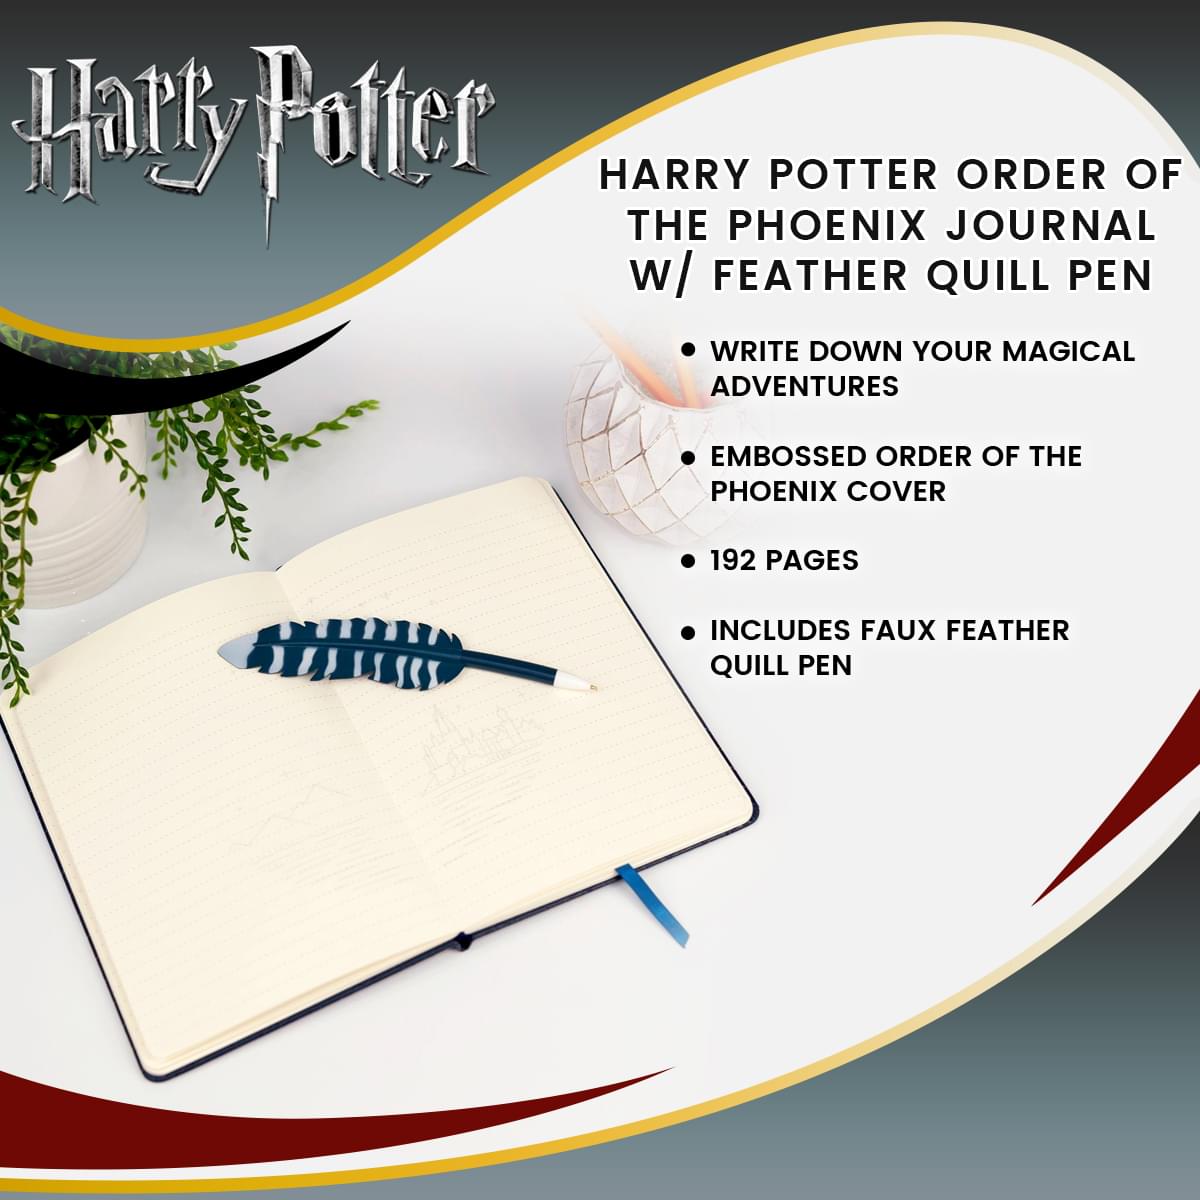 Harry Potter Order of the Phoenix Journal w/ Feather Quill Pen